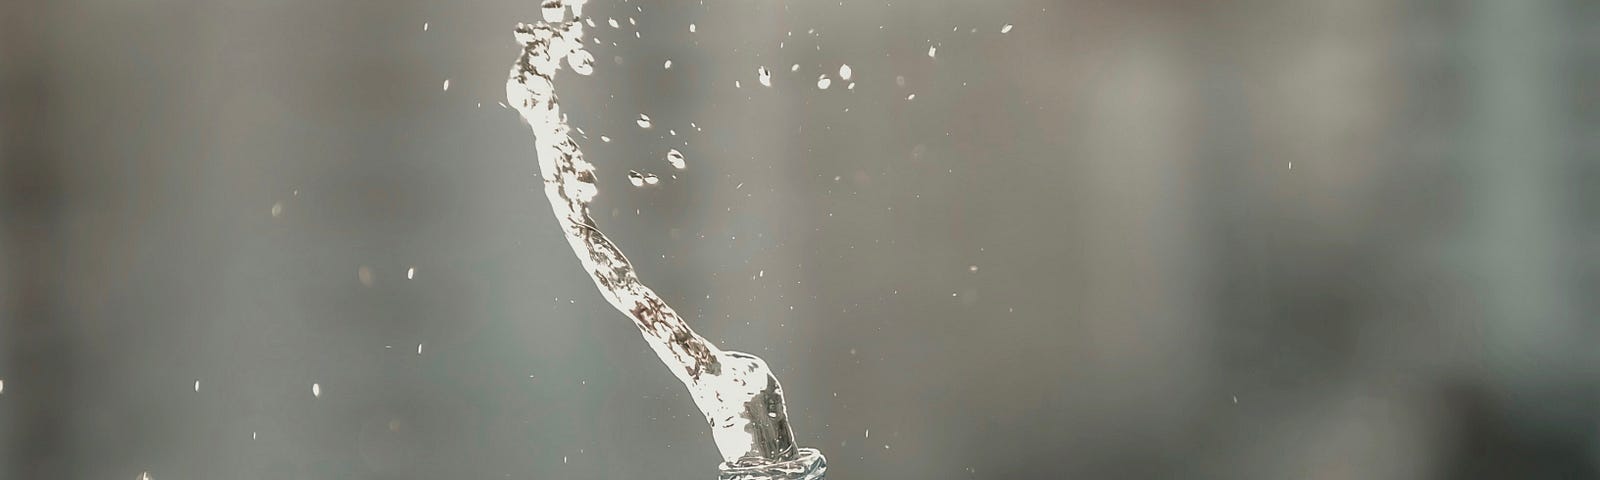 A person squeezes a plastic bottle of water, causing the fluid to spurt upwards.